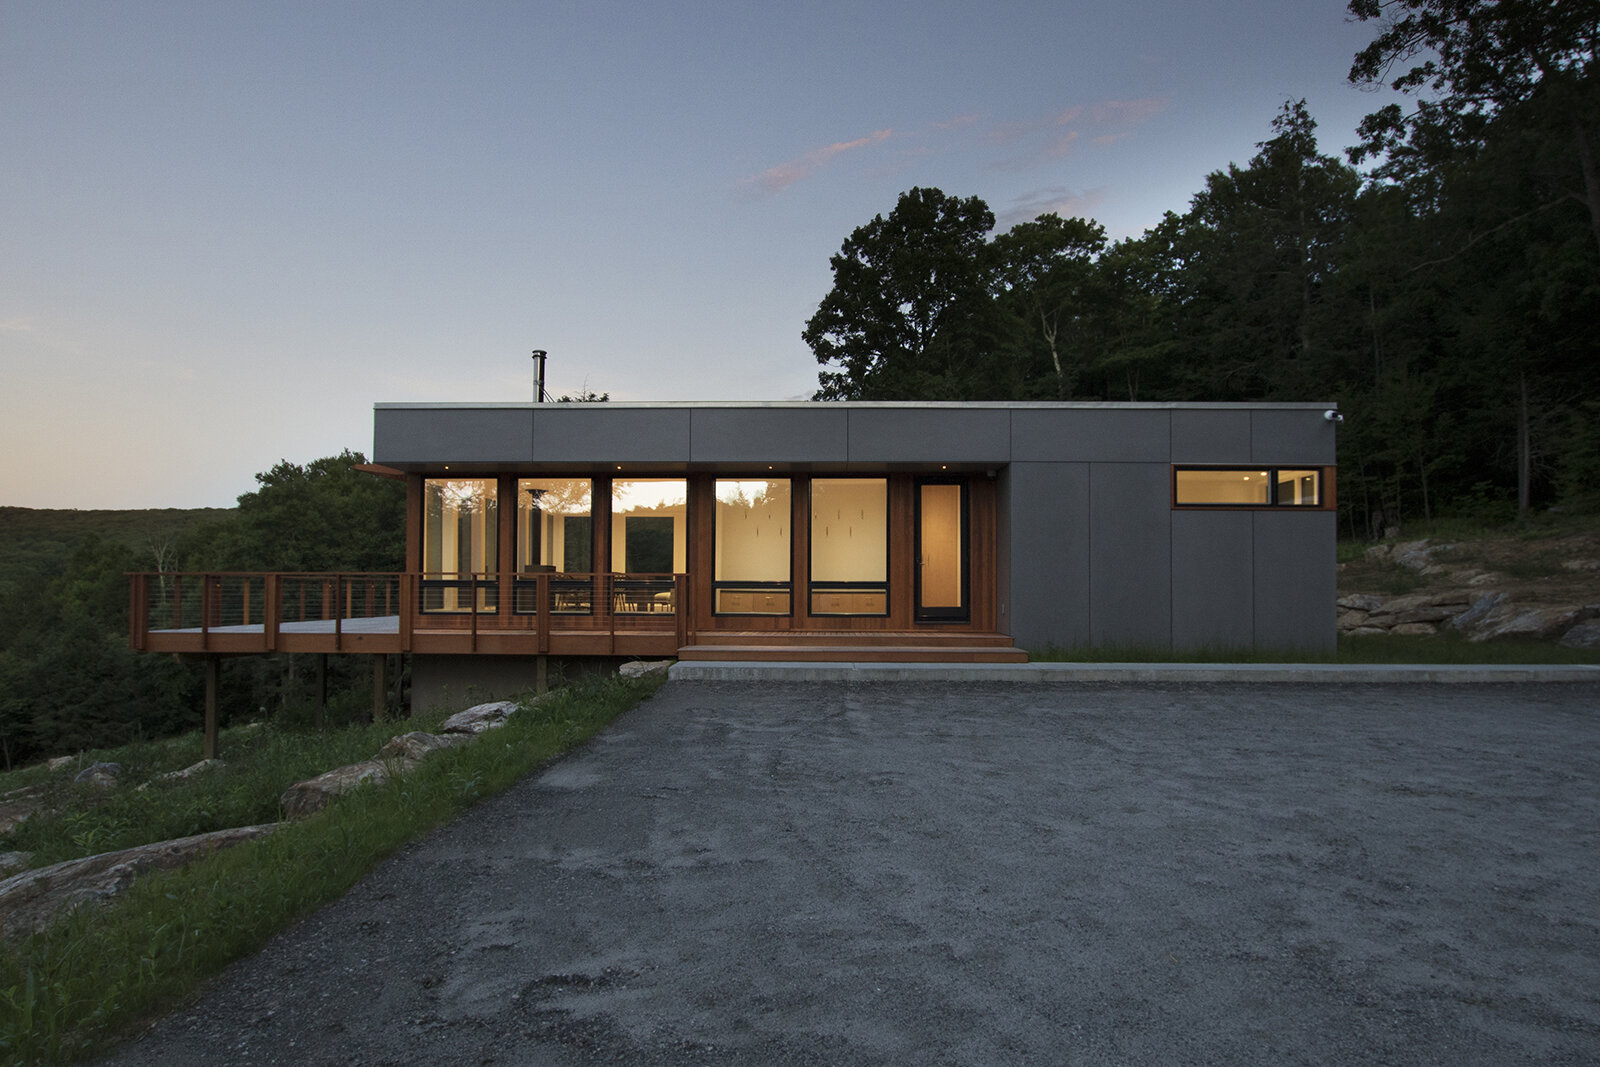 24-res4-re4a-resolution-4-architecture-modern-modular-prefab-sharon residence-exterior-night-entry court.jpg